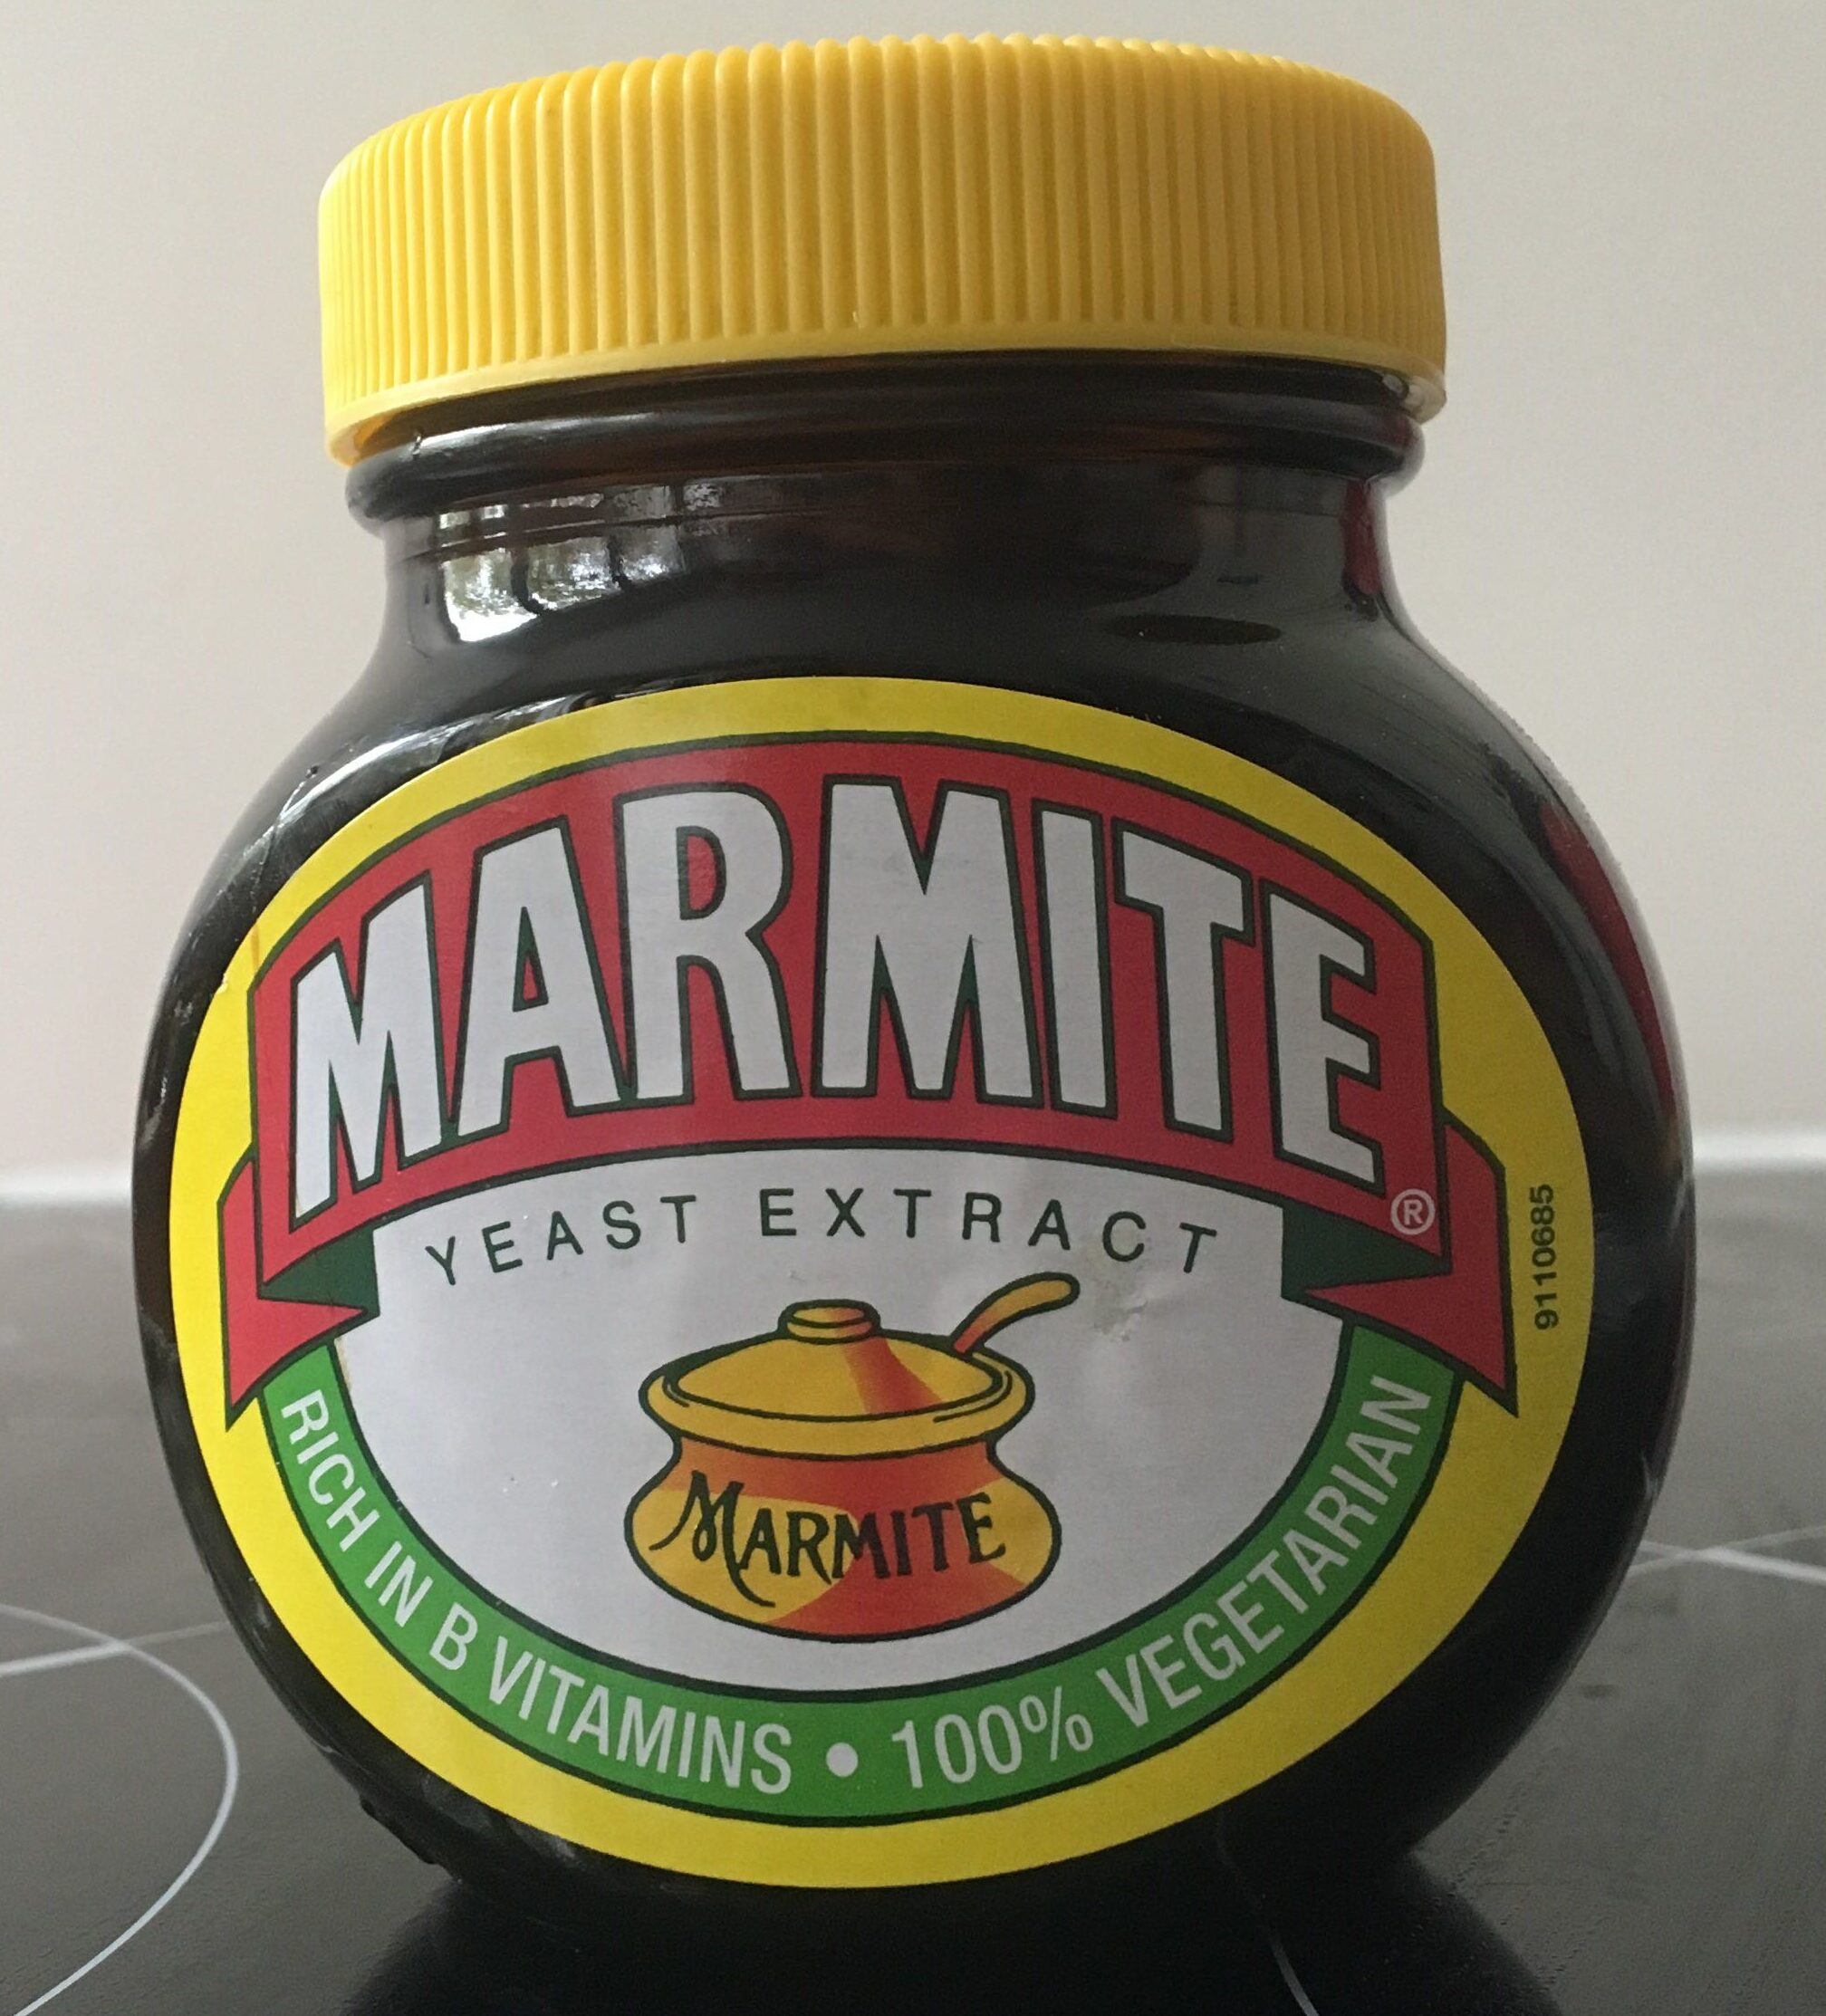 Marmite Yeast Extract 250g - Product